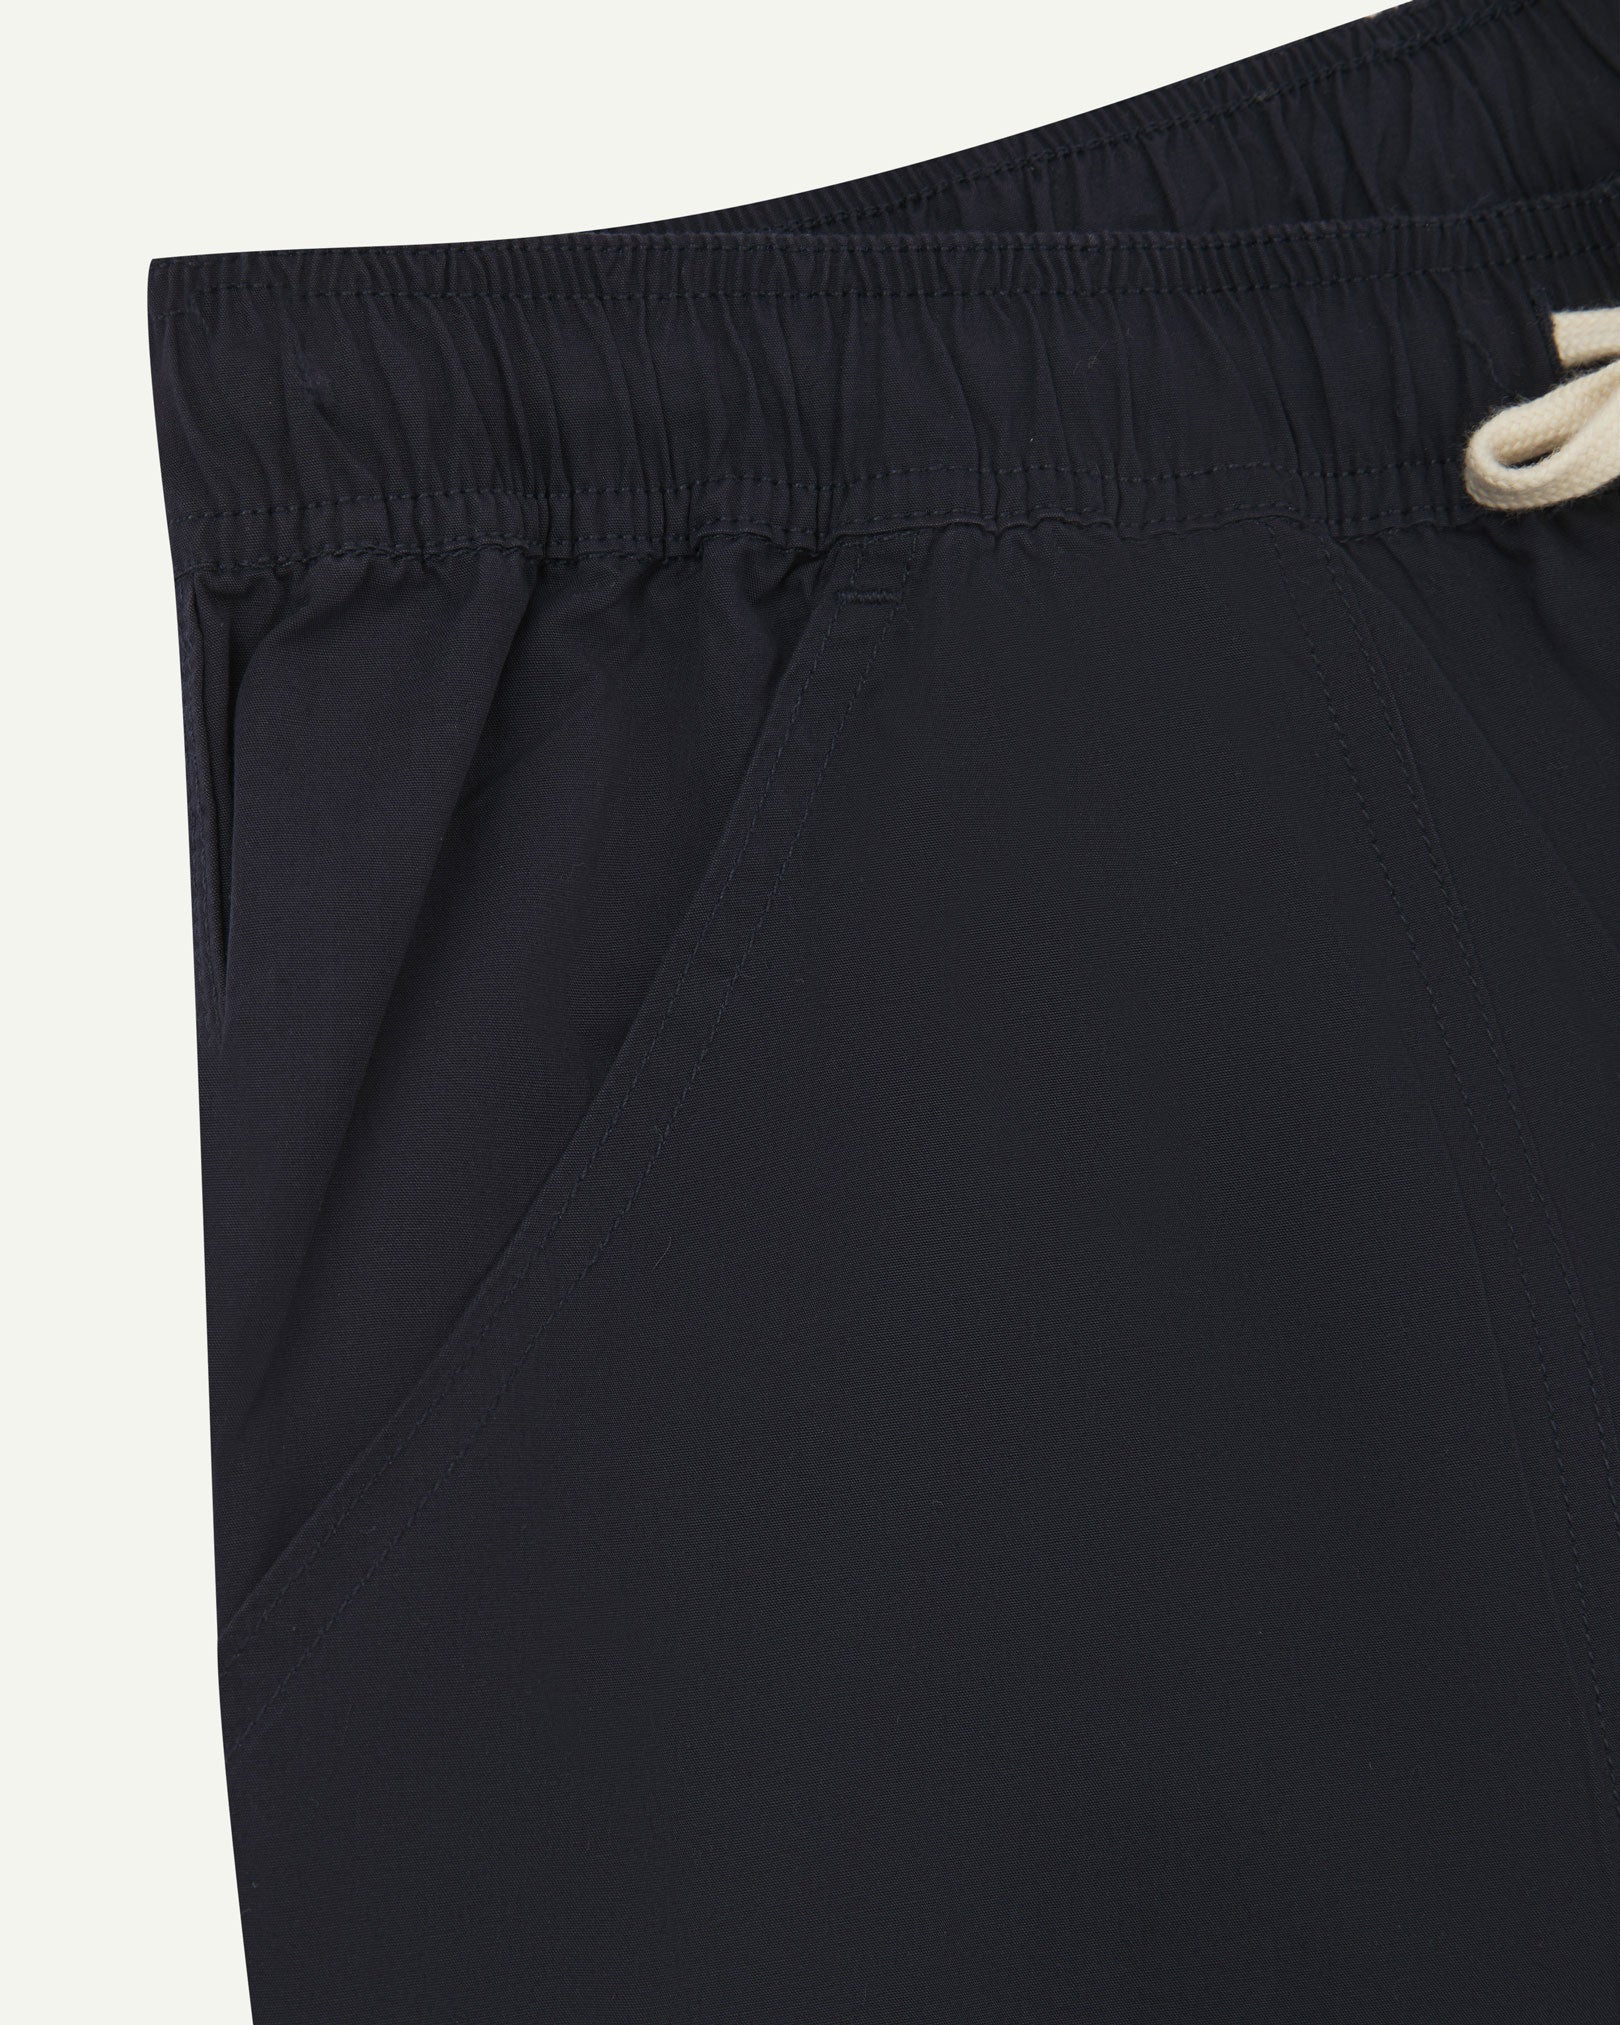 Front close-up shot of Uskees 5020 lightweight utility pants in midnight blue showing waist and front pocket detail.